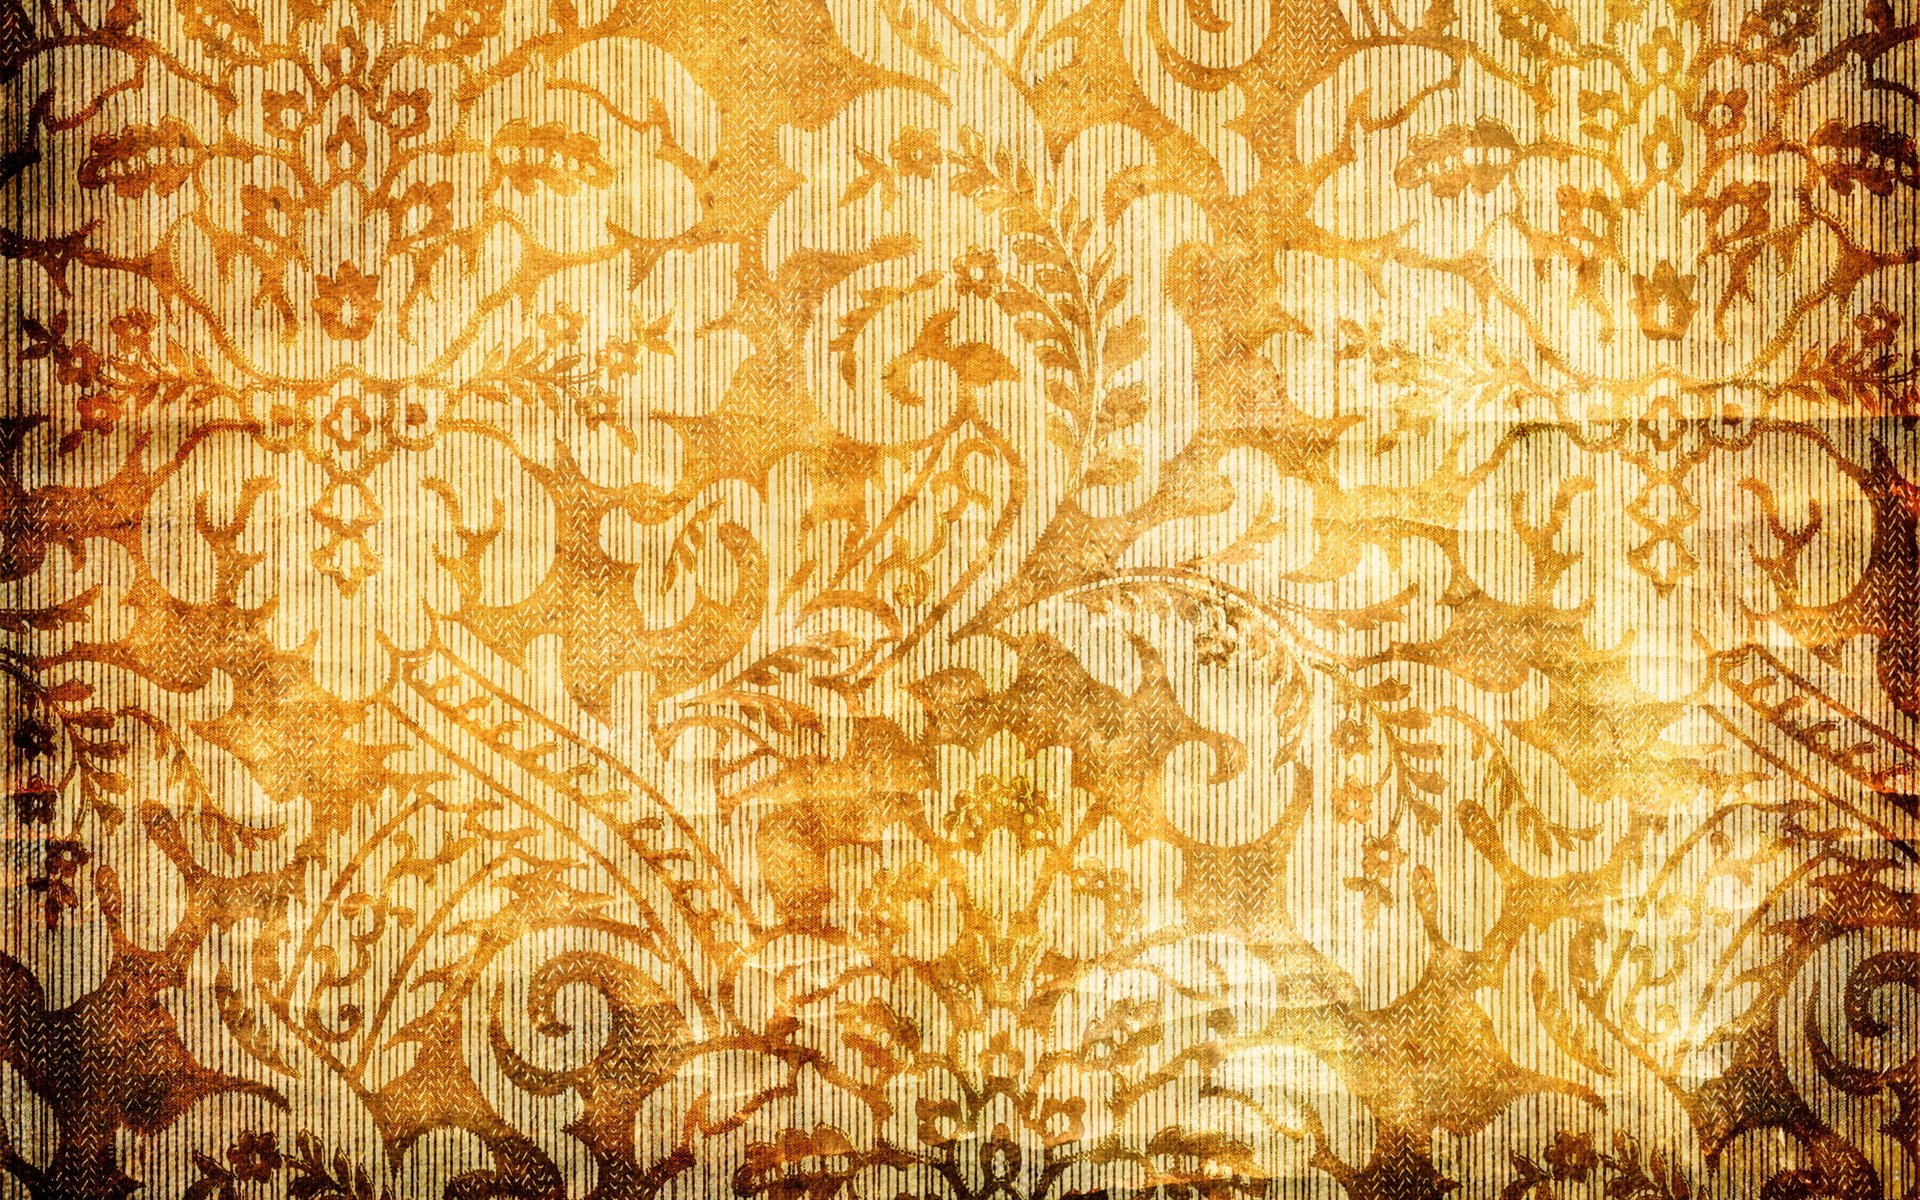  background patterns flowers petals red yellow orange gold 1920x1200